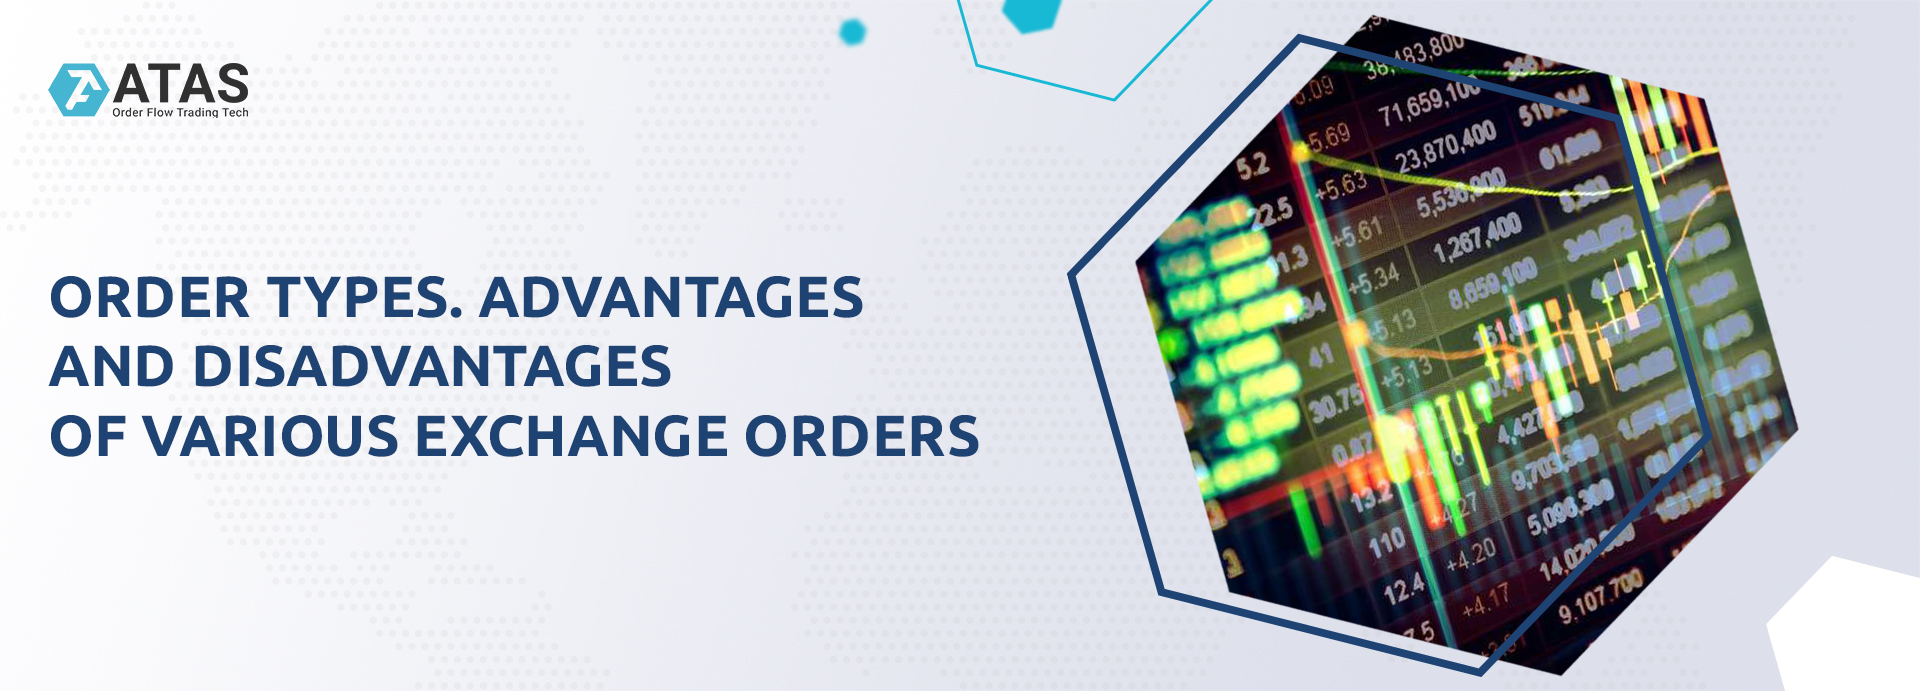 Order types. Advantages and disadvantages of various exchange orders